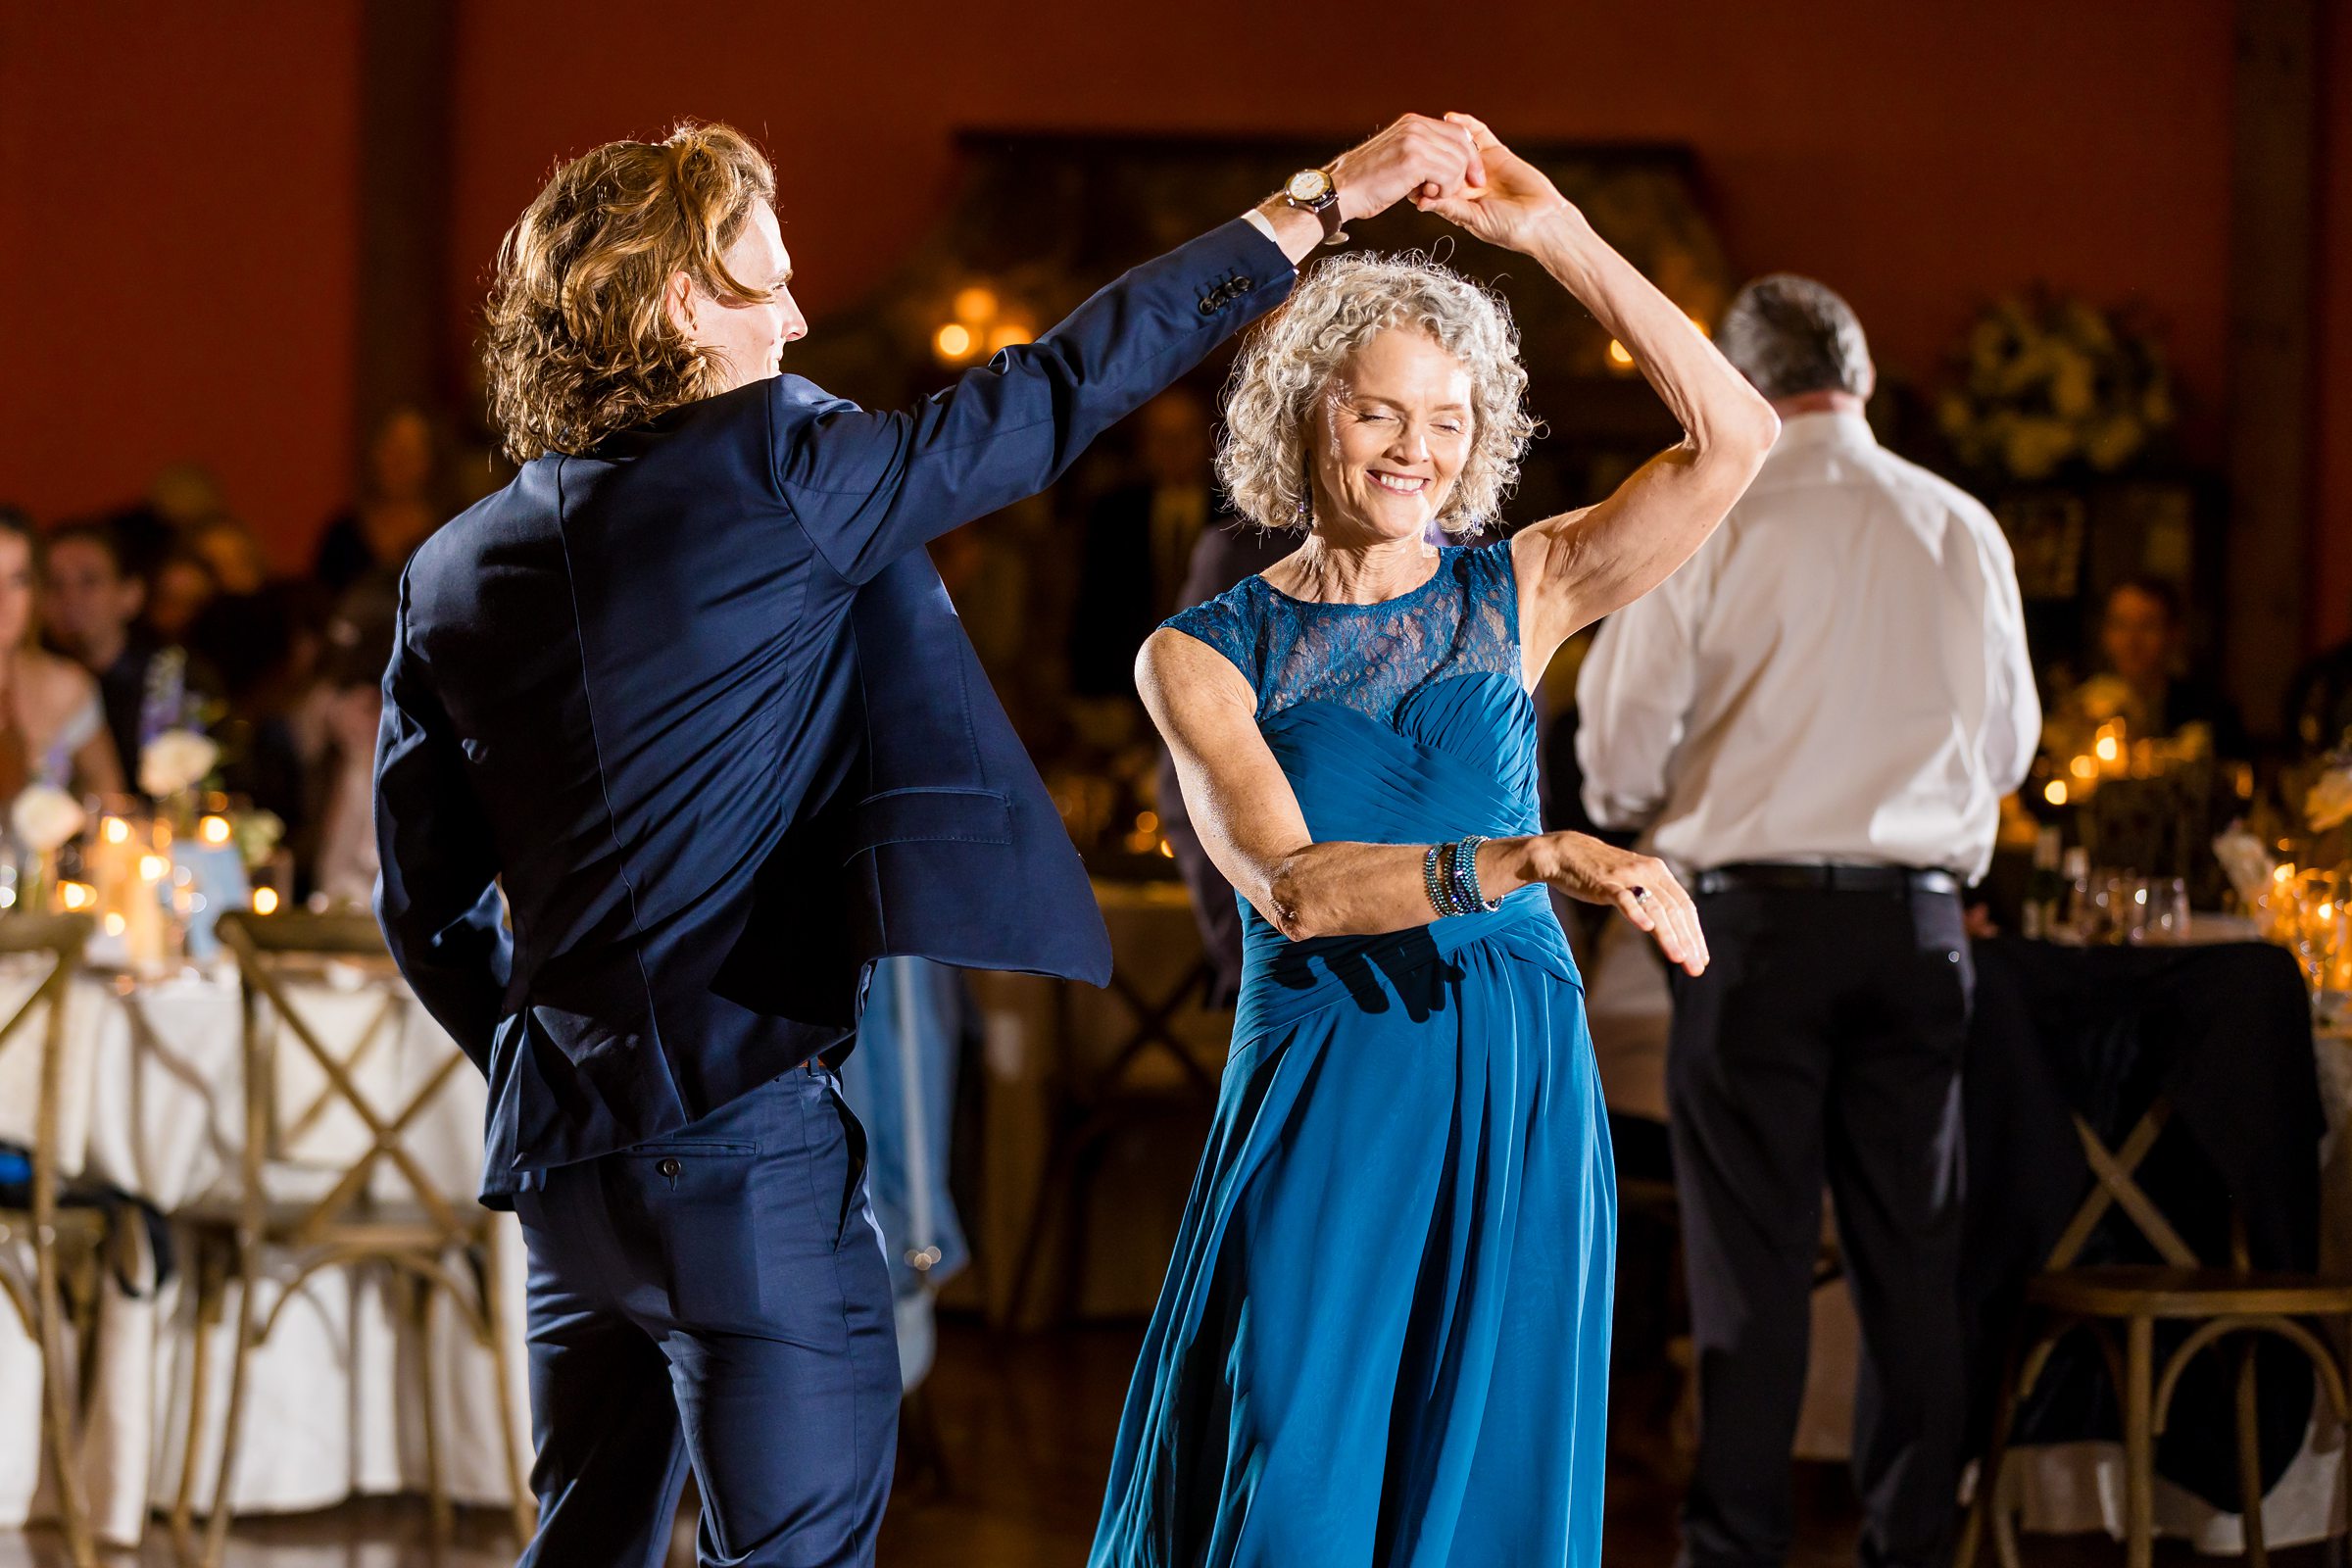 An elderly woman in a blue dress dances and smiles with a man in a blue suit at a formal event with tables and dim lighting in the background.